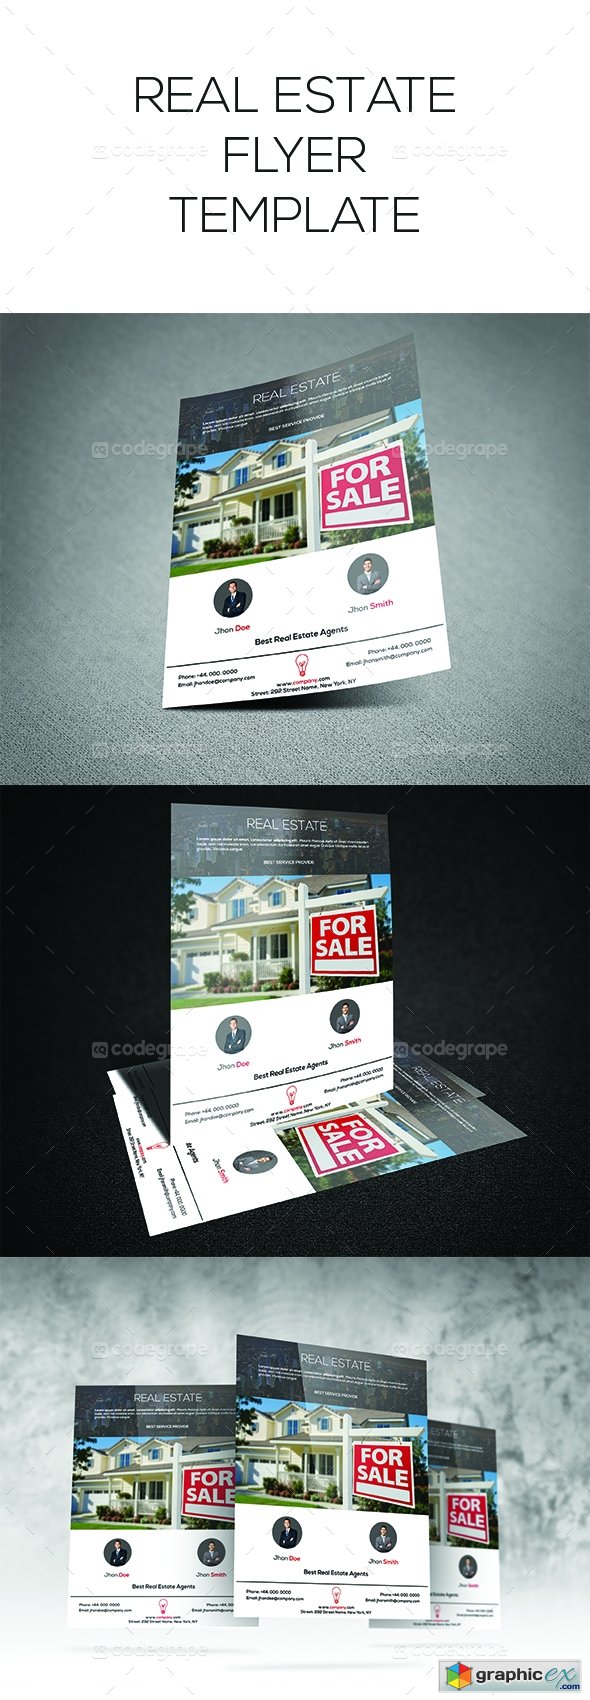 Real Estate Flyer Template 5717